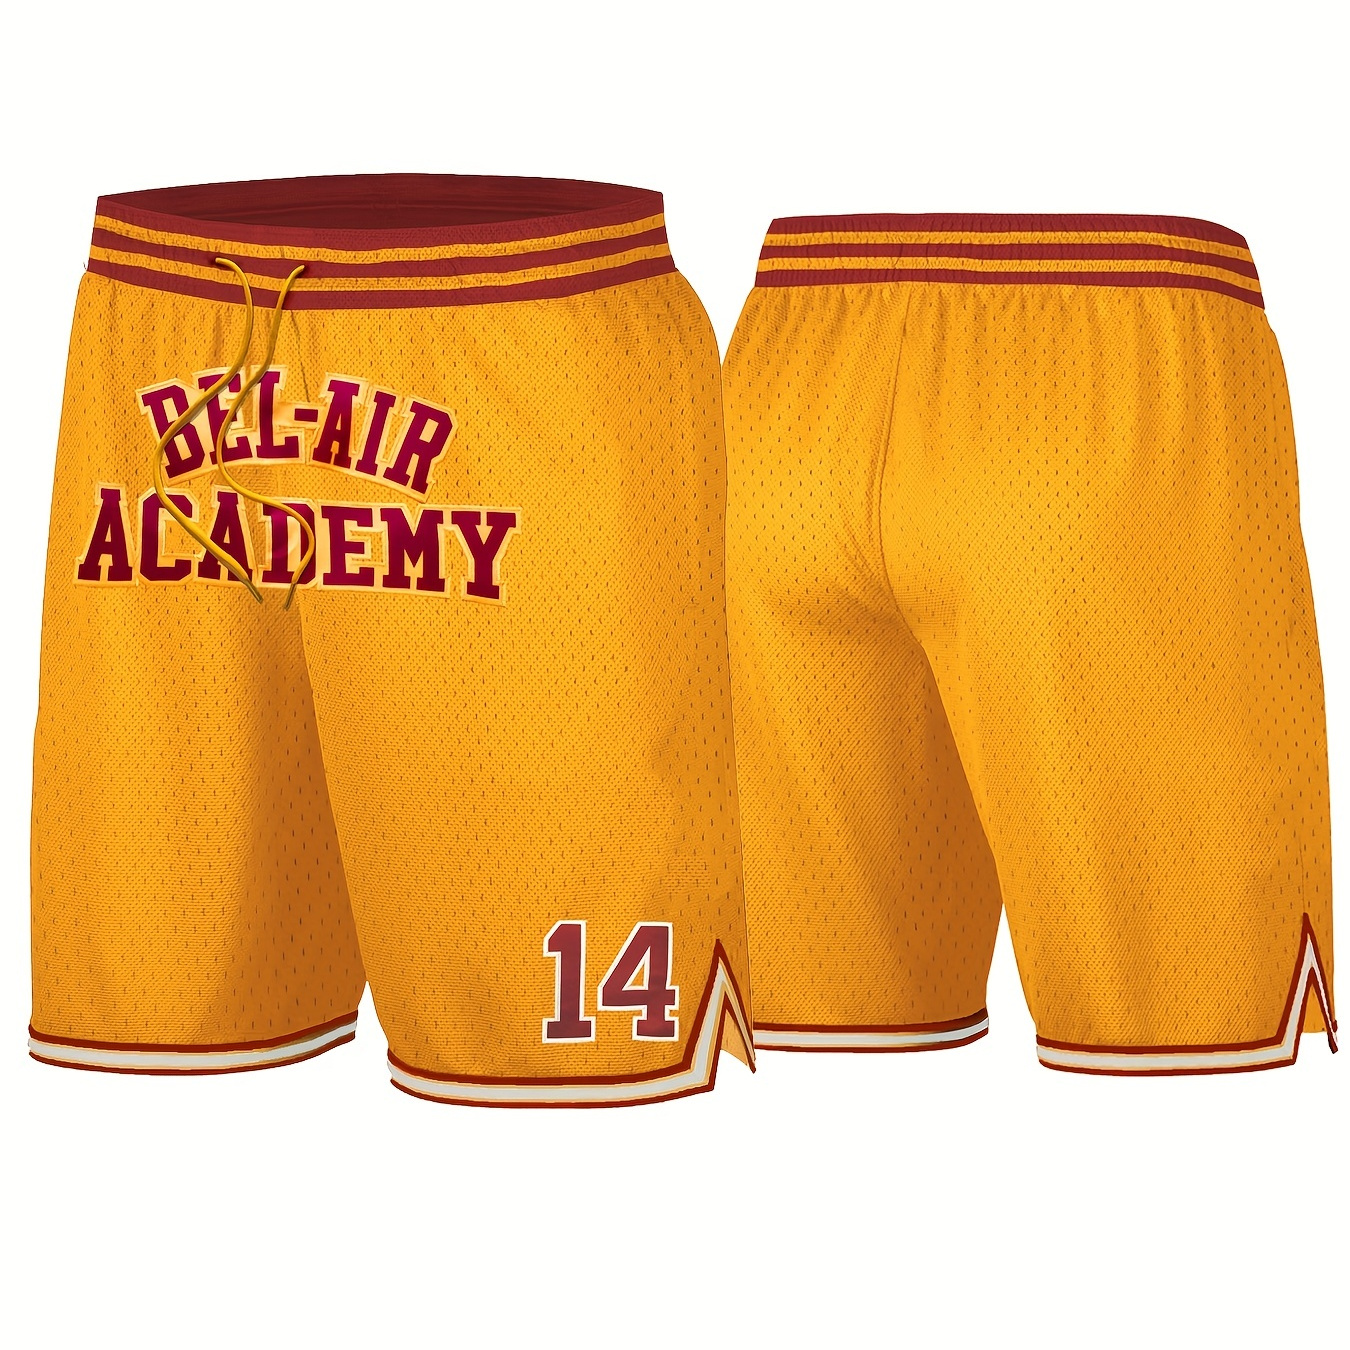 

Men's #14 Basketball Shorts, Active Slightly Stretch Breathable Embroidered Loose Shorts For Competition Training Party Size S-xxxl